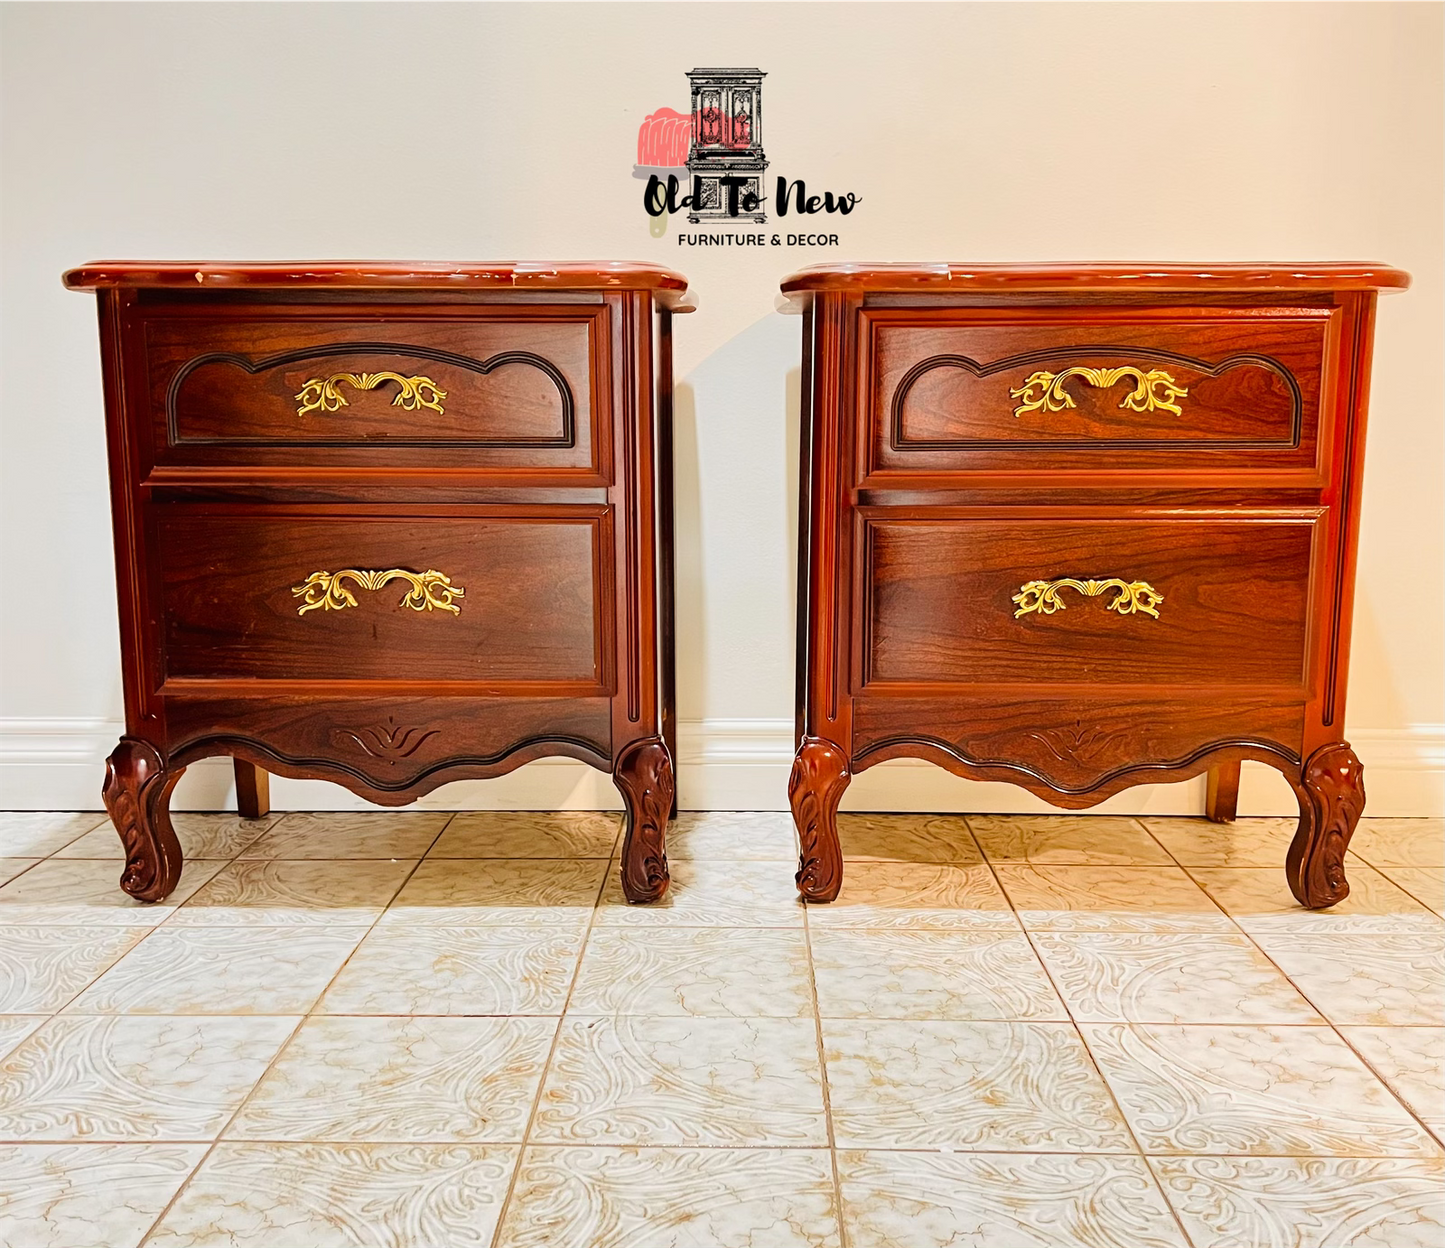 French Provincial Furniture Toronto